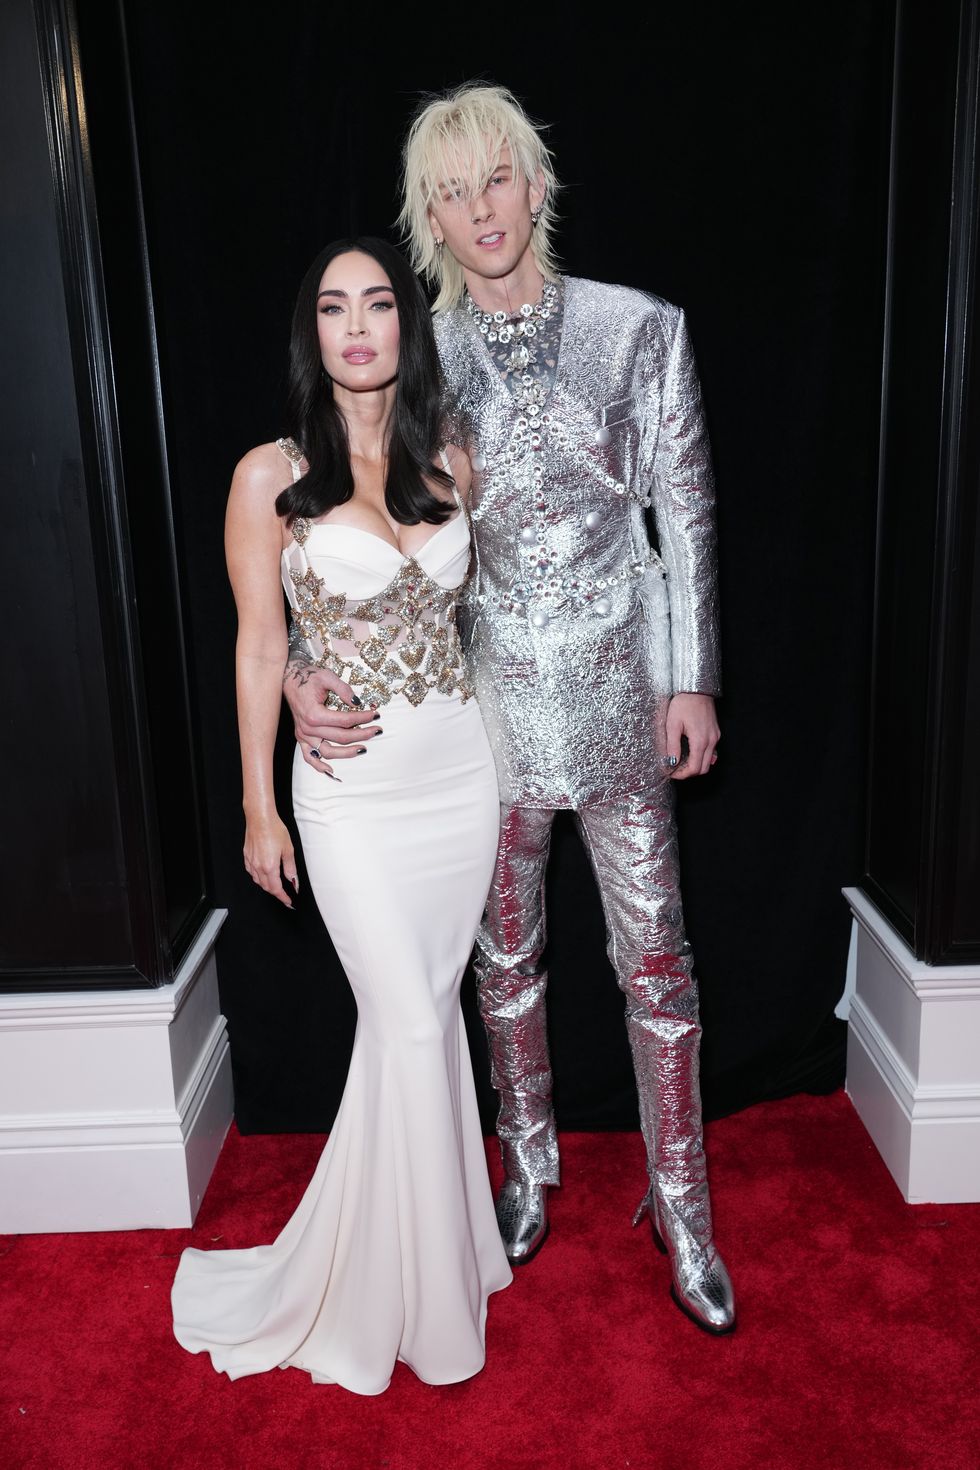 Megan Fox Introduced All of the Glamour in an Ivory Robe on the 2023 Grammys